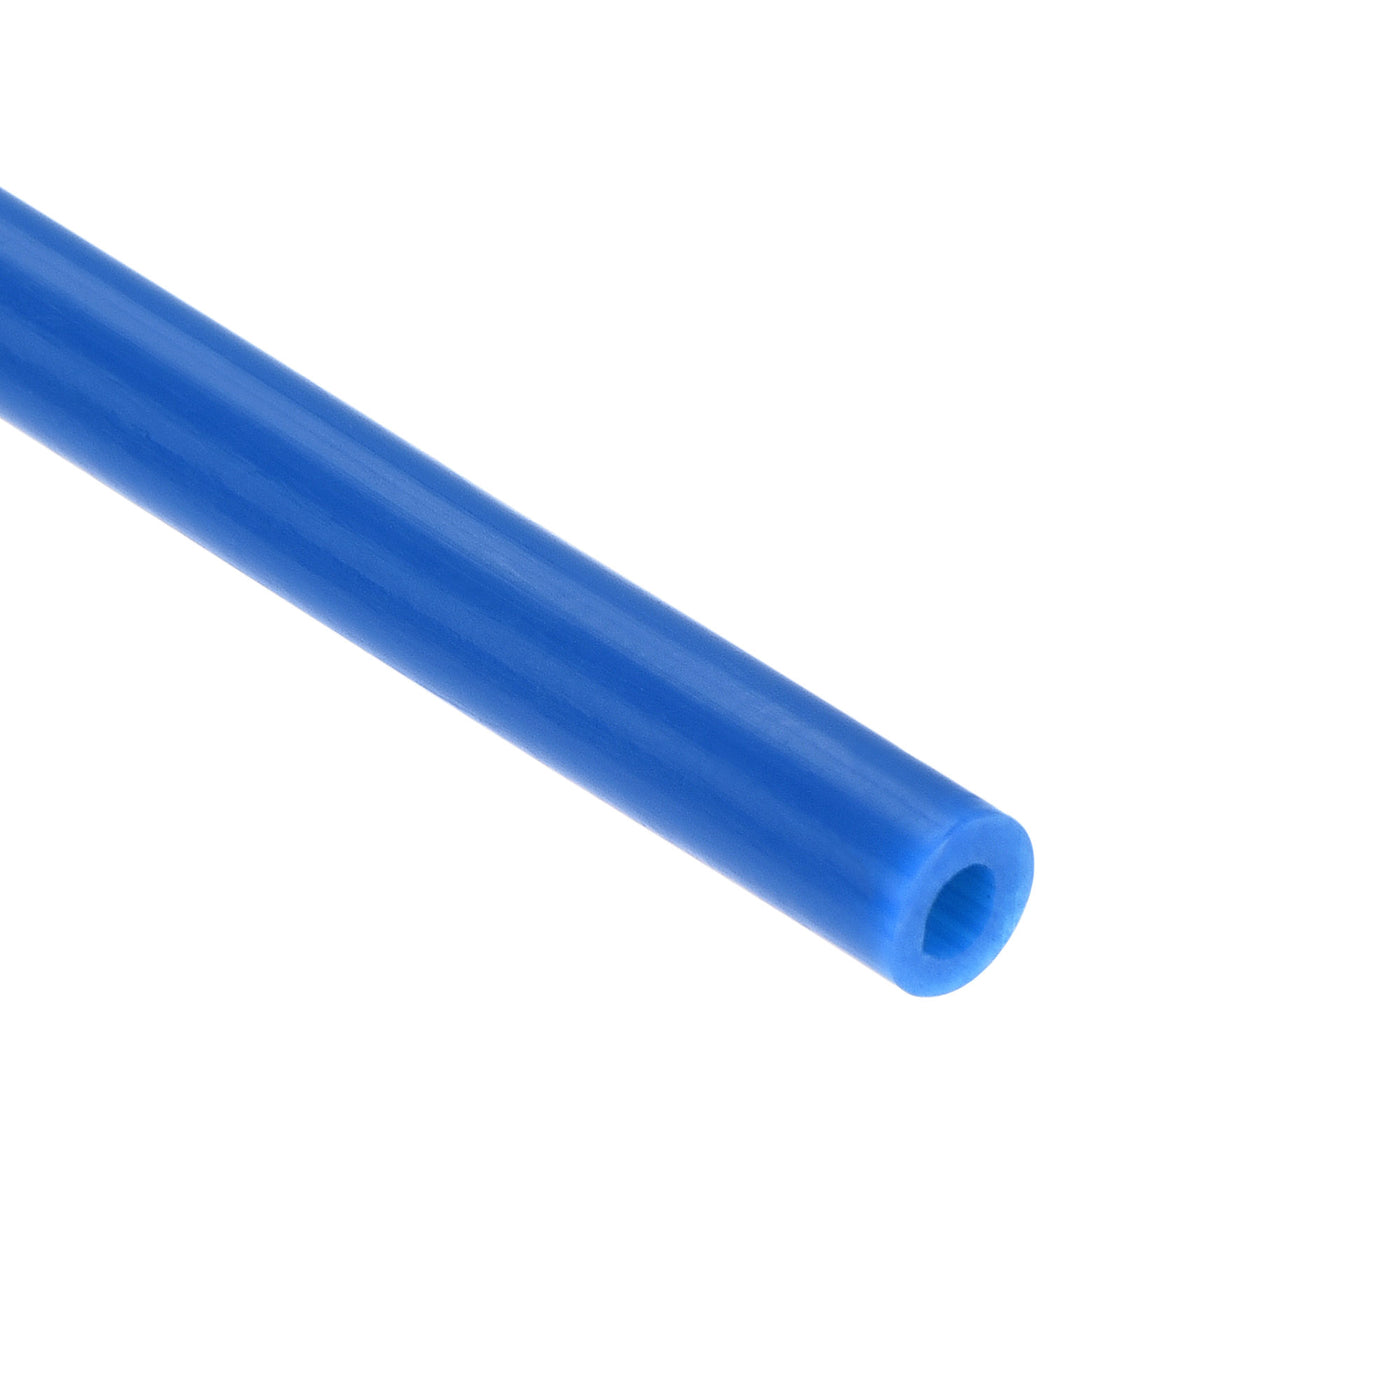 uxcell Uxcell Pneumatic PTFE Air Tubing Hose Kit 4mm OD 2M Length Blue with Tube Cutter and M6 M10 Fittings